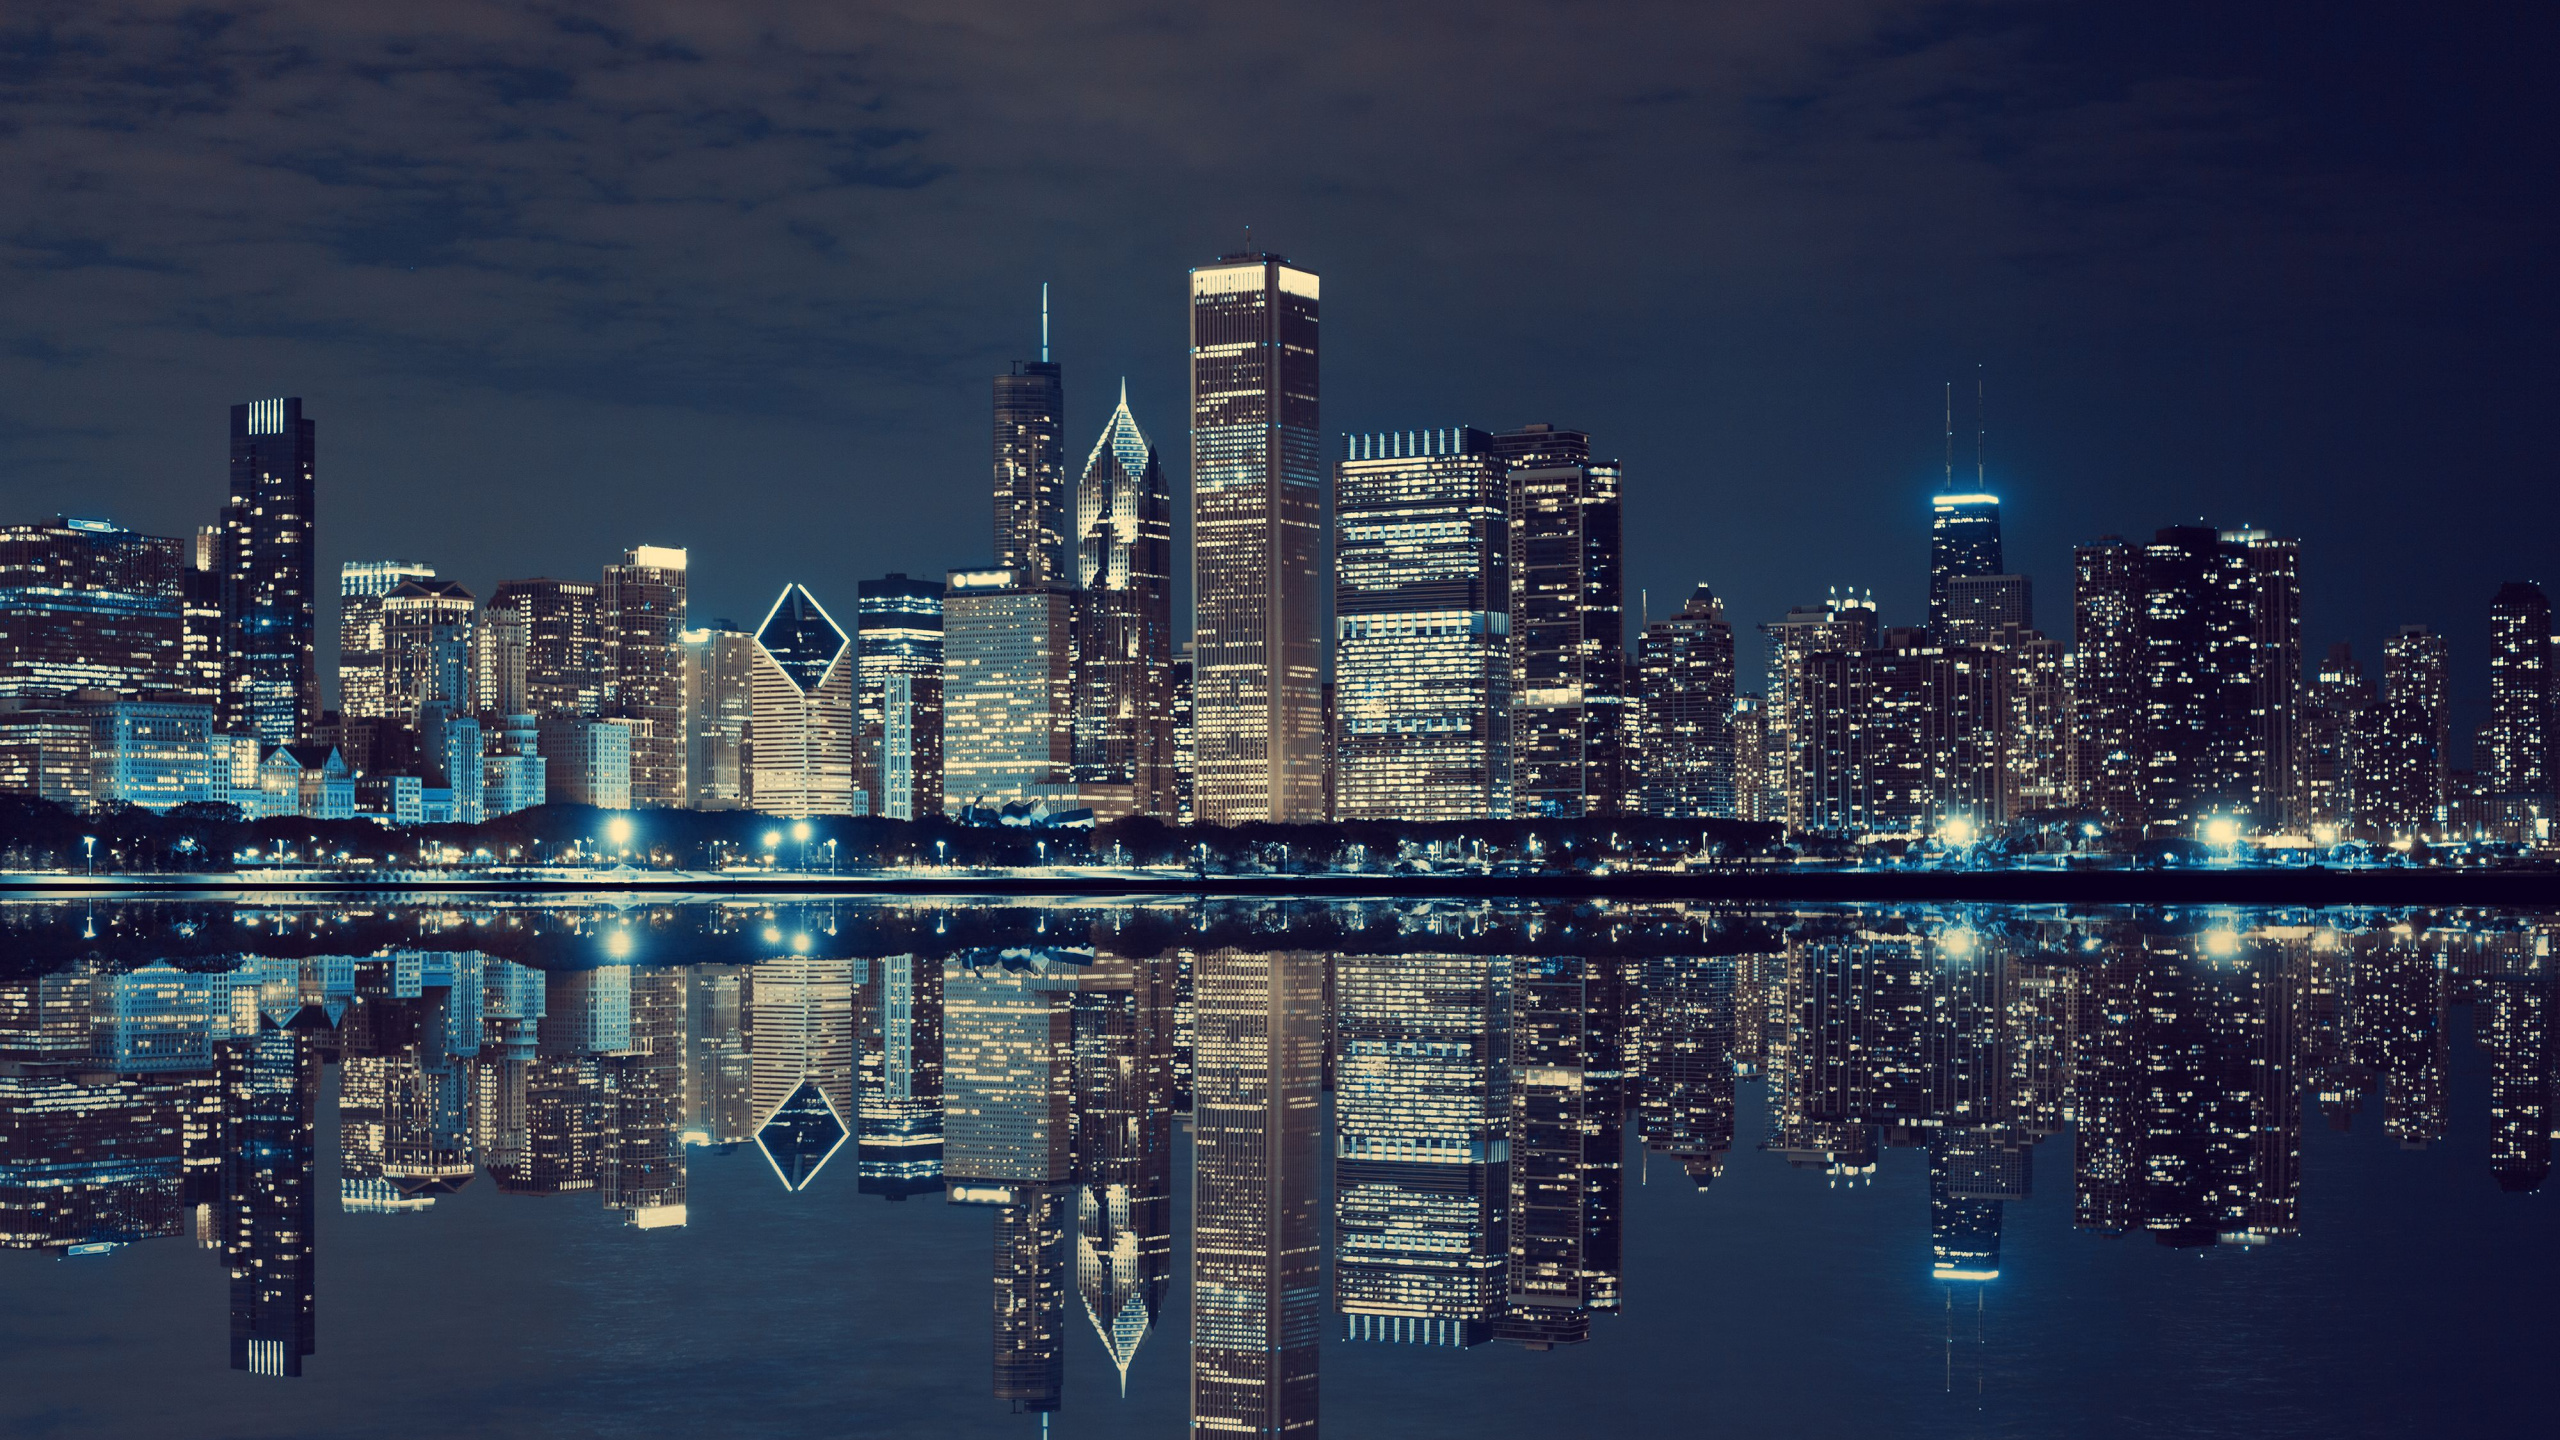 The Chicago skyline at night. 